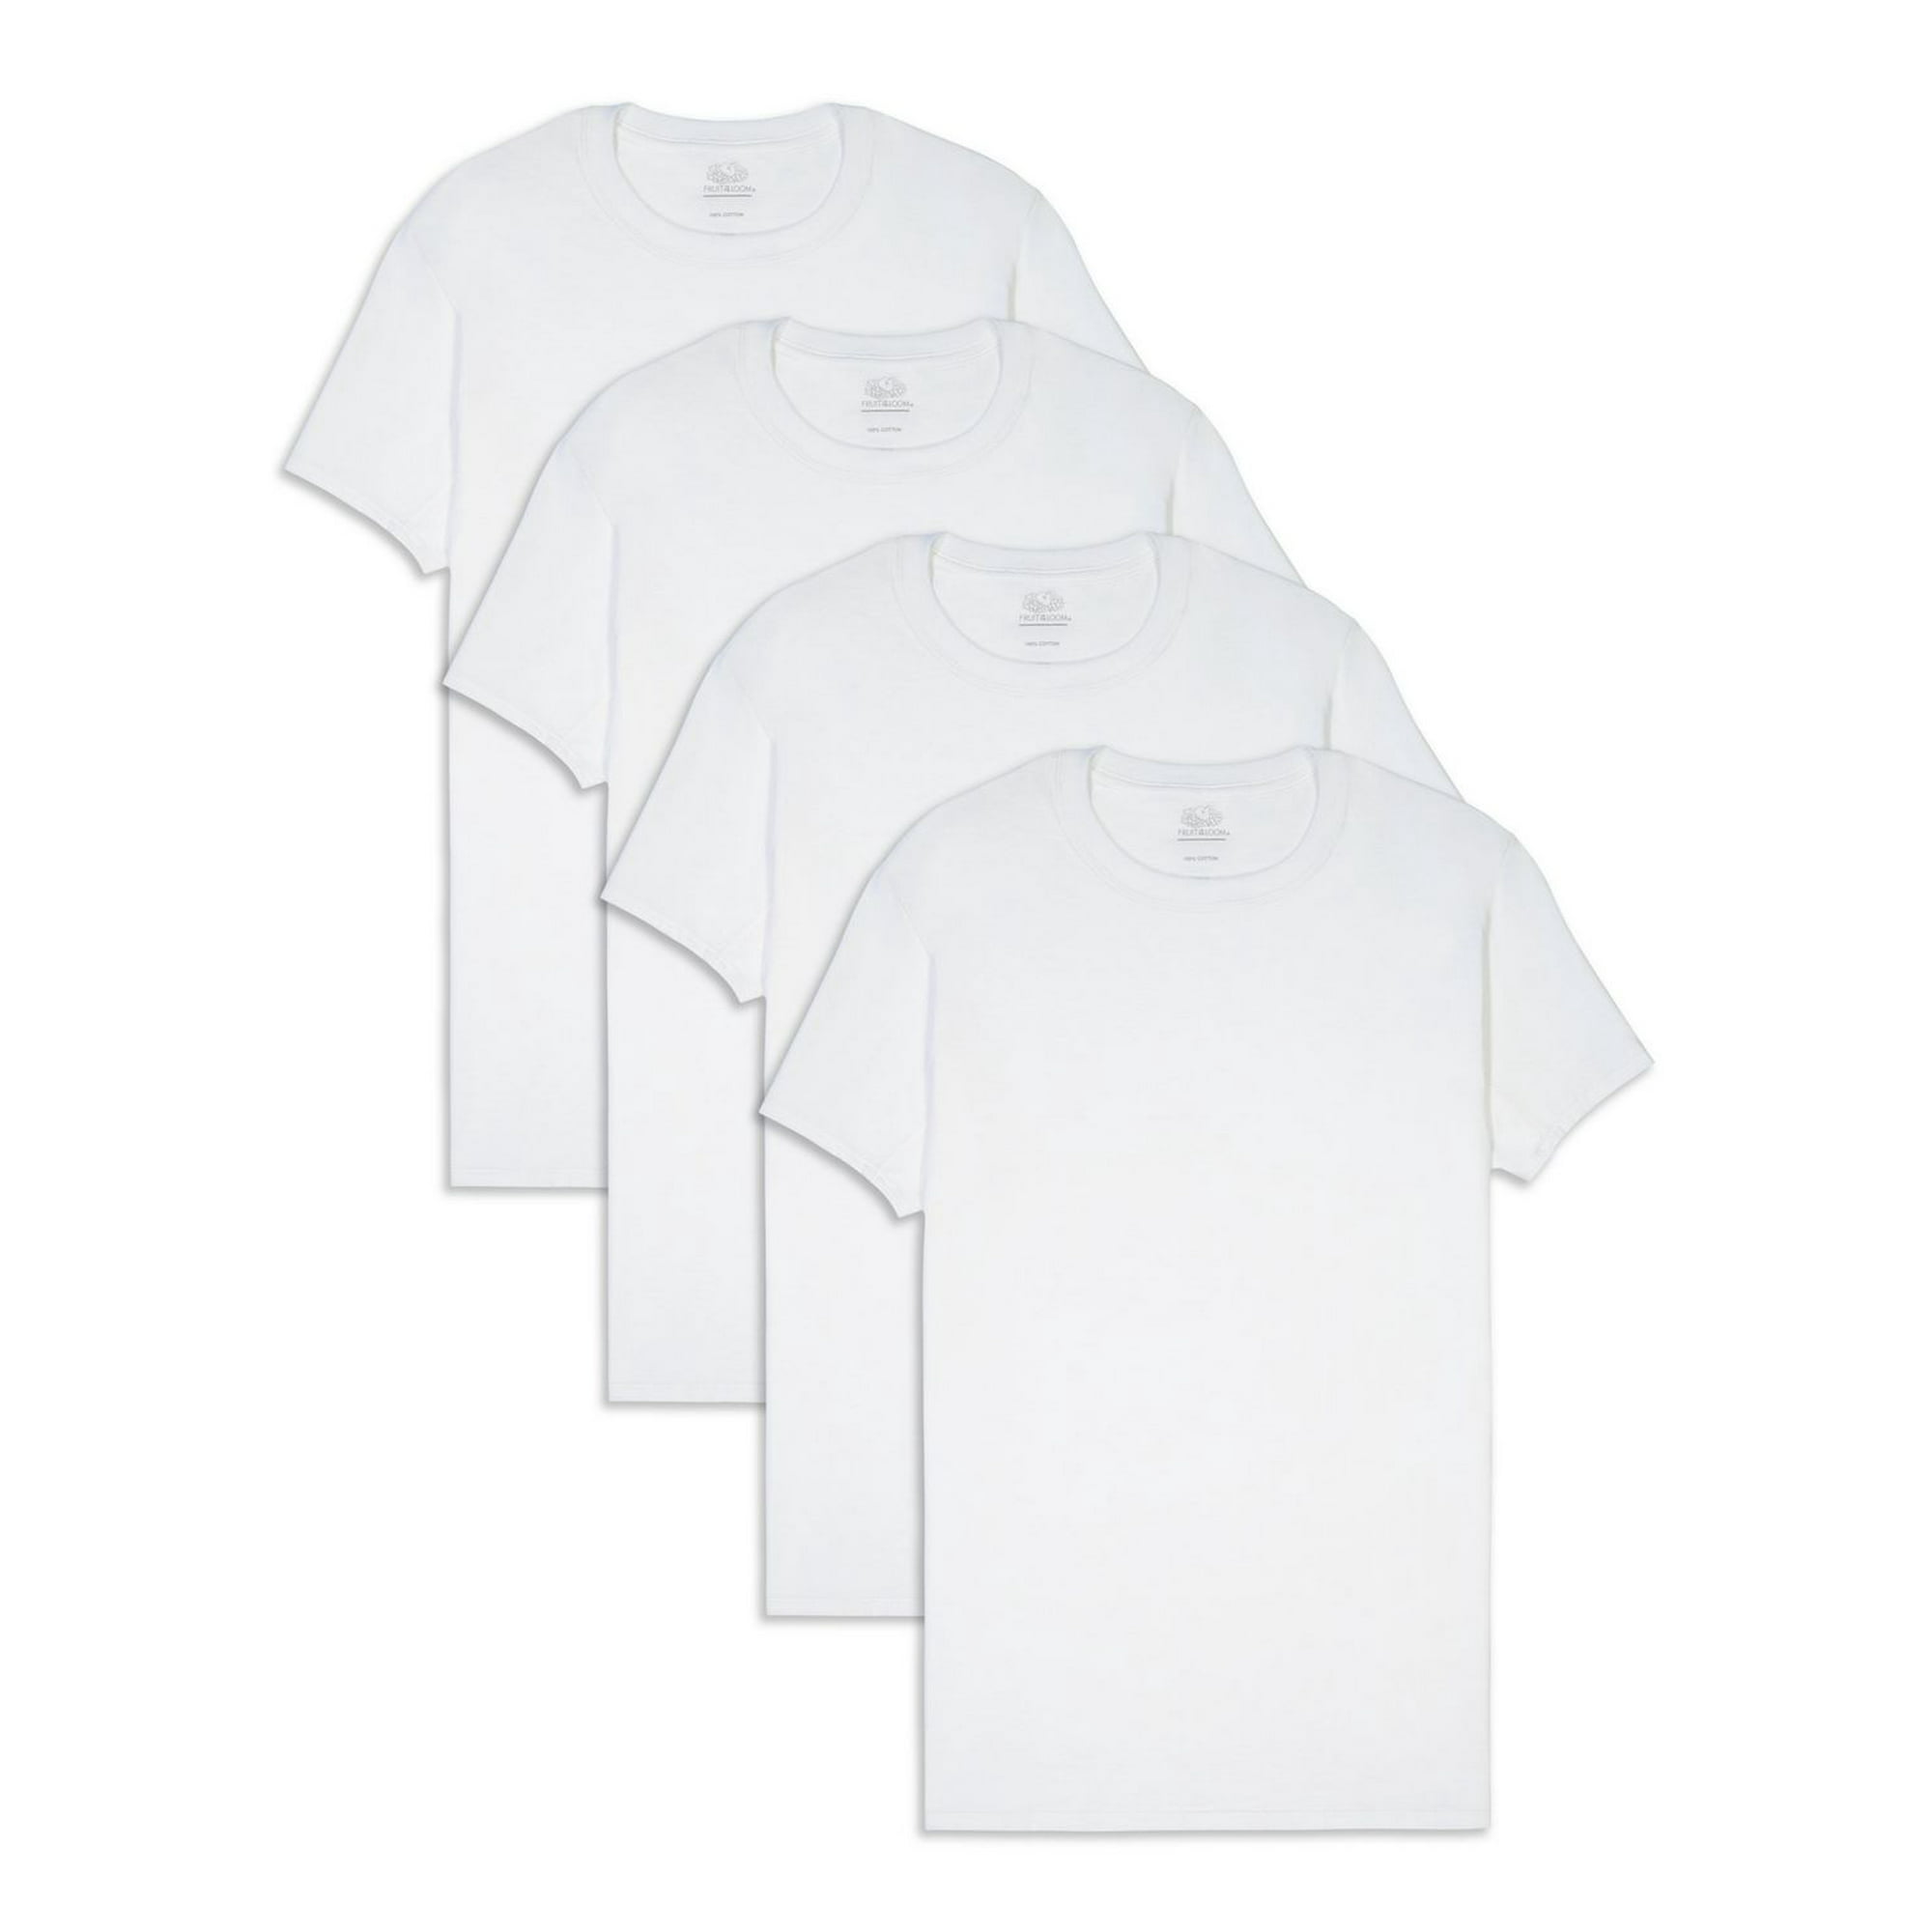 Fruit of the Loom Boys' Cotton White T Shirt, Toddler-12 Pack-Natural, 2-3T